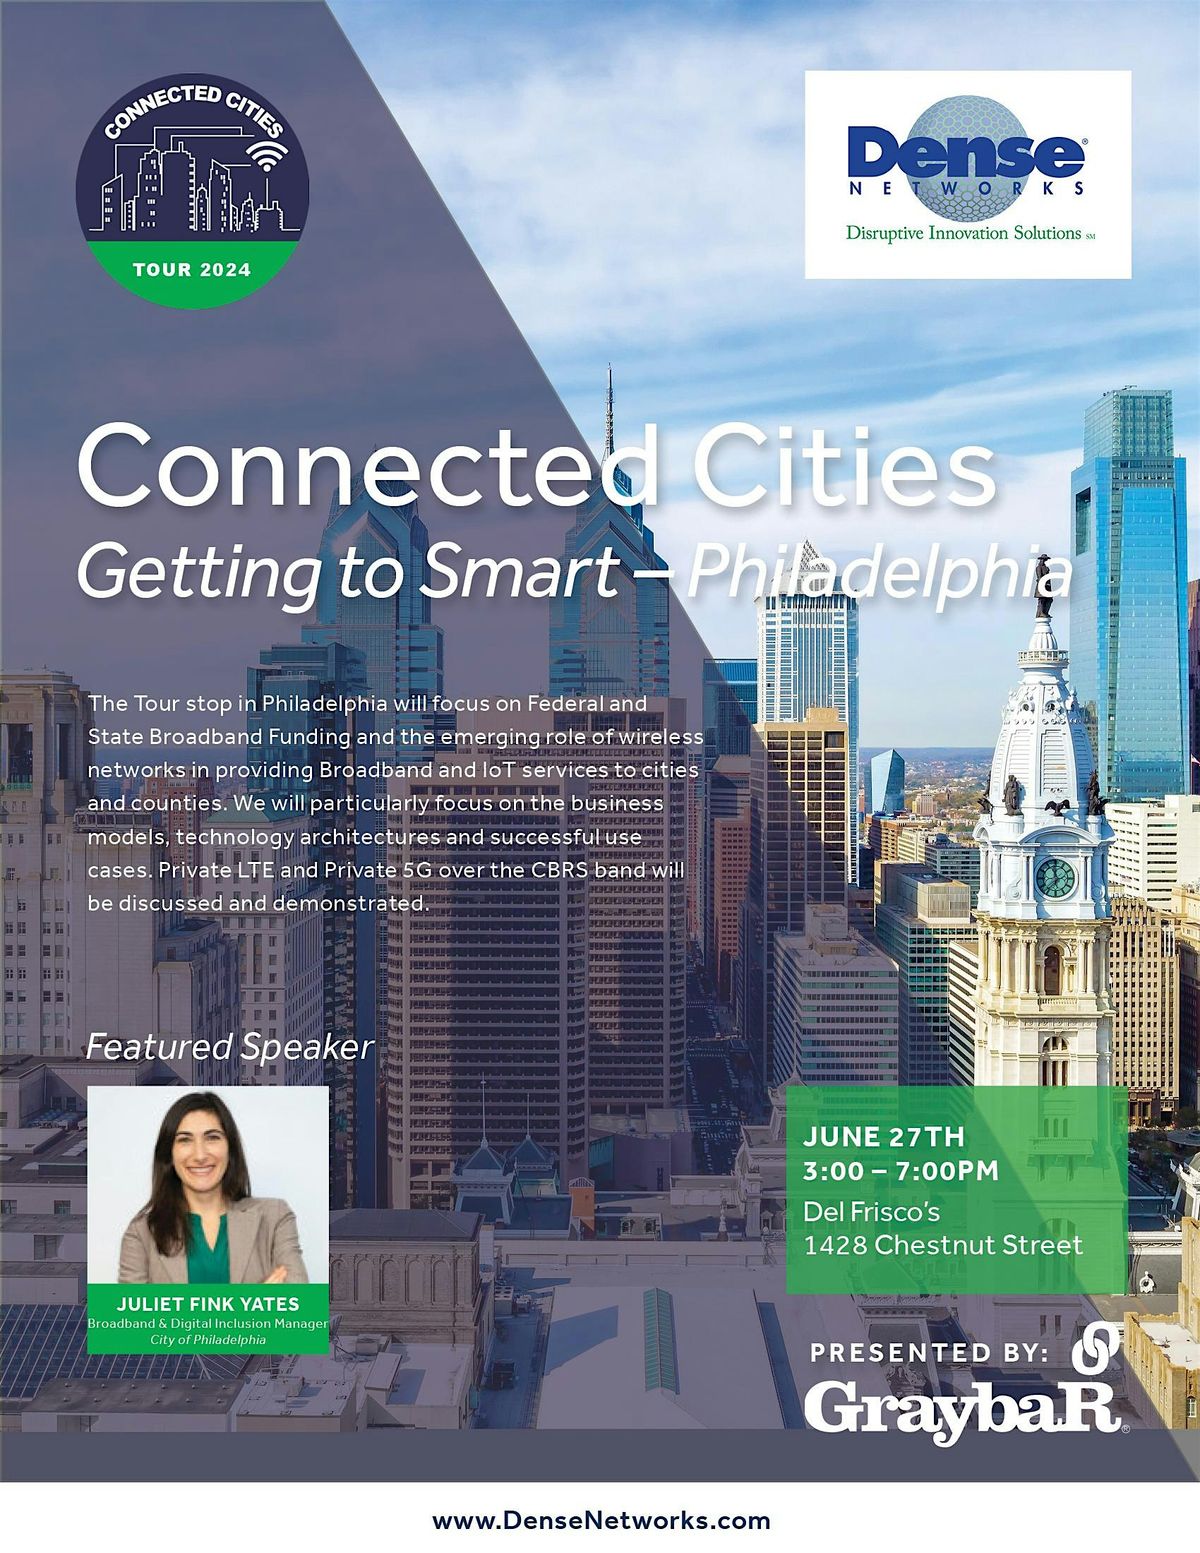 Connected Cities Tour-Getting to Smart